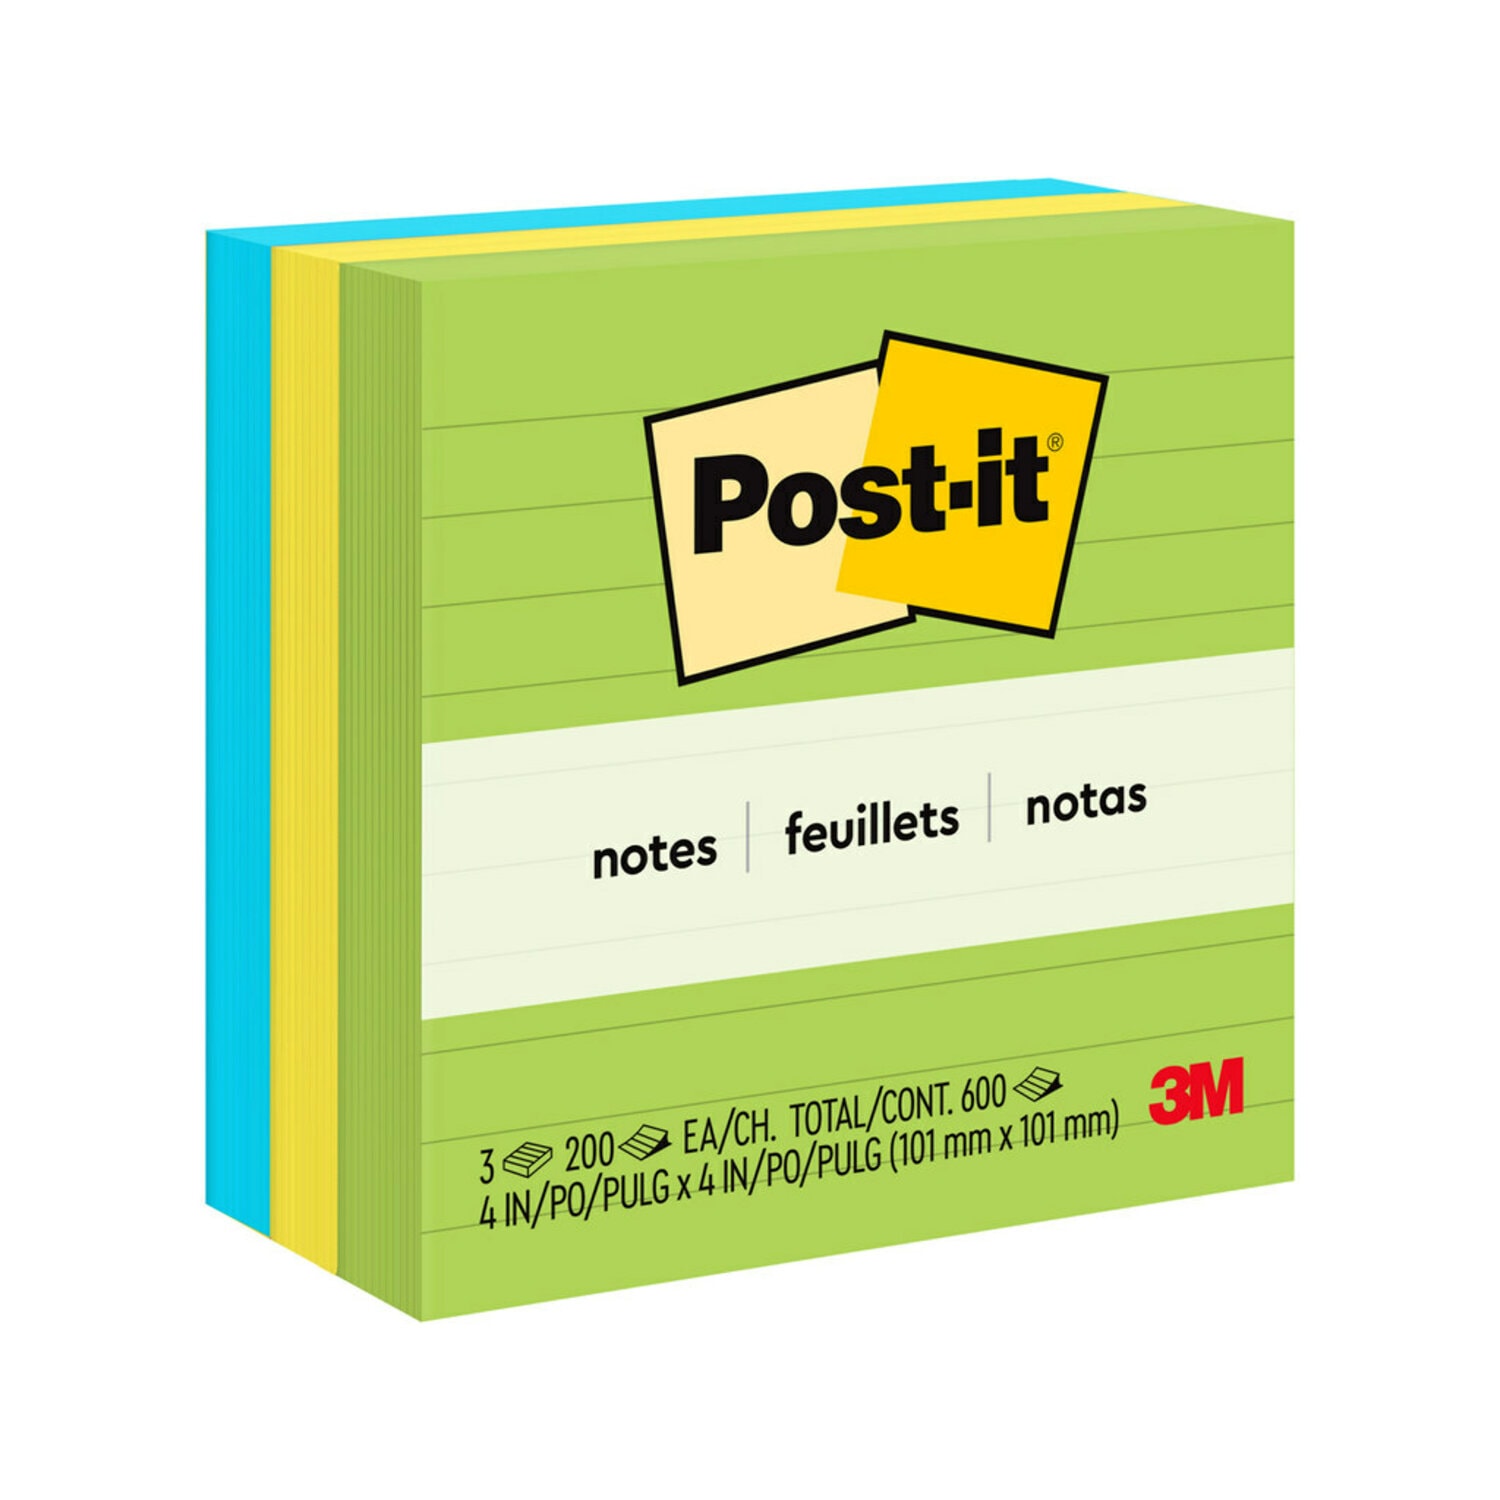 7100145163 - Post-it Notes, 675-3AUL, 4 in x 4 in (101 mm x 101 mm) Jaipur colors. 3
pads, 200 sheets/pad